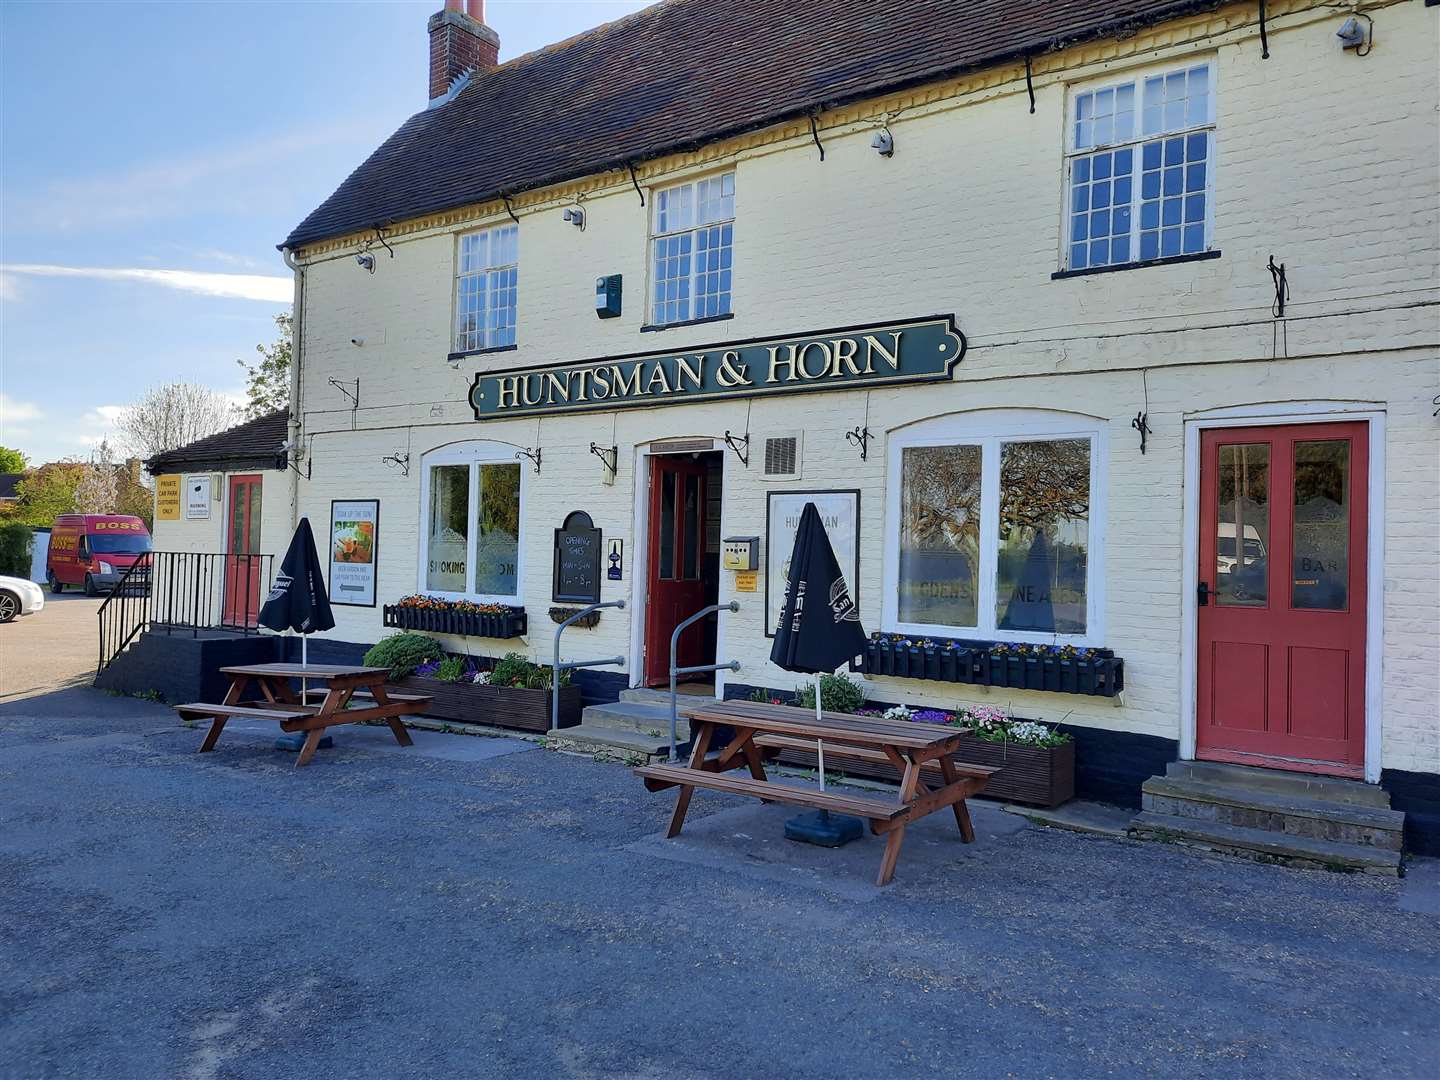 The Huntsman and Horn in Broomfield, Herne Bay